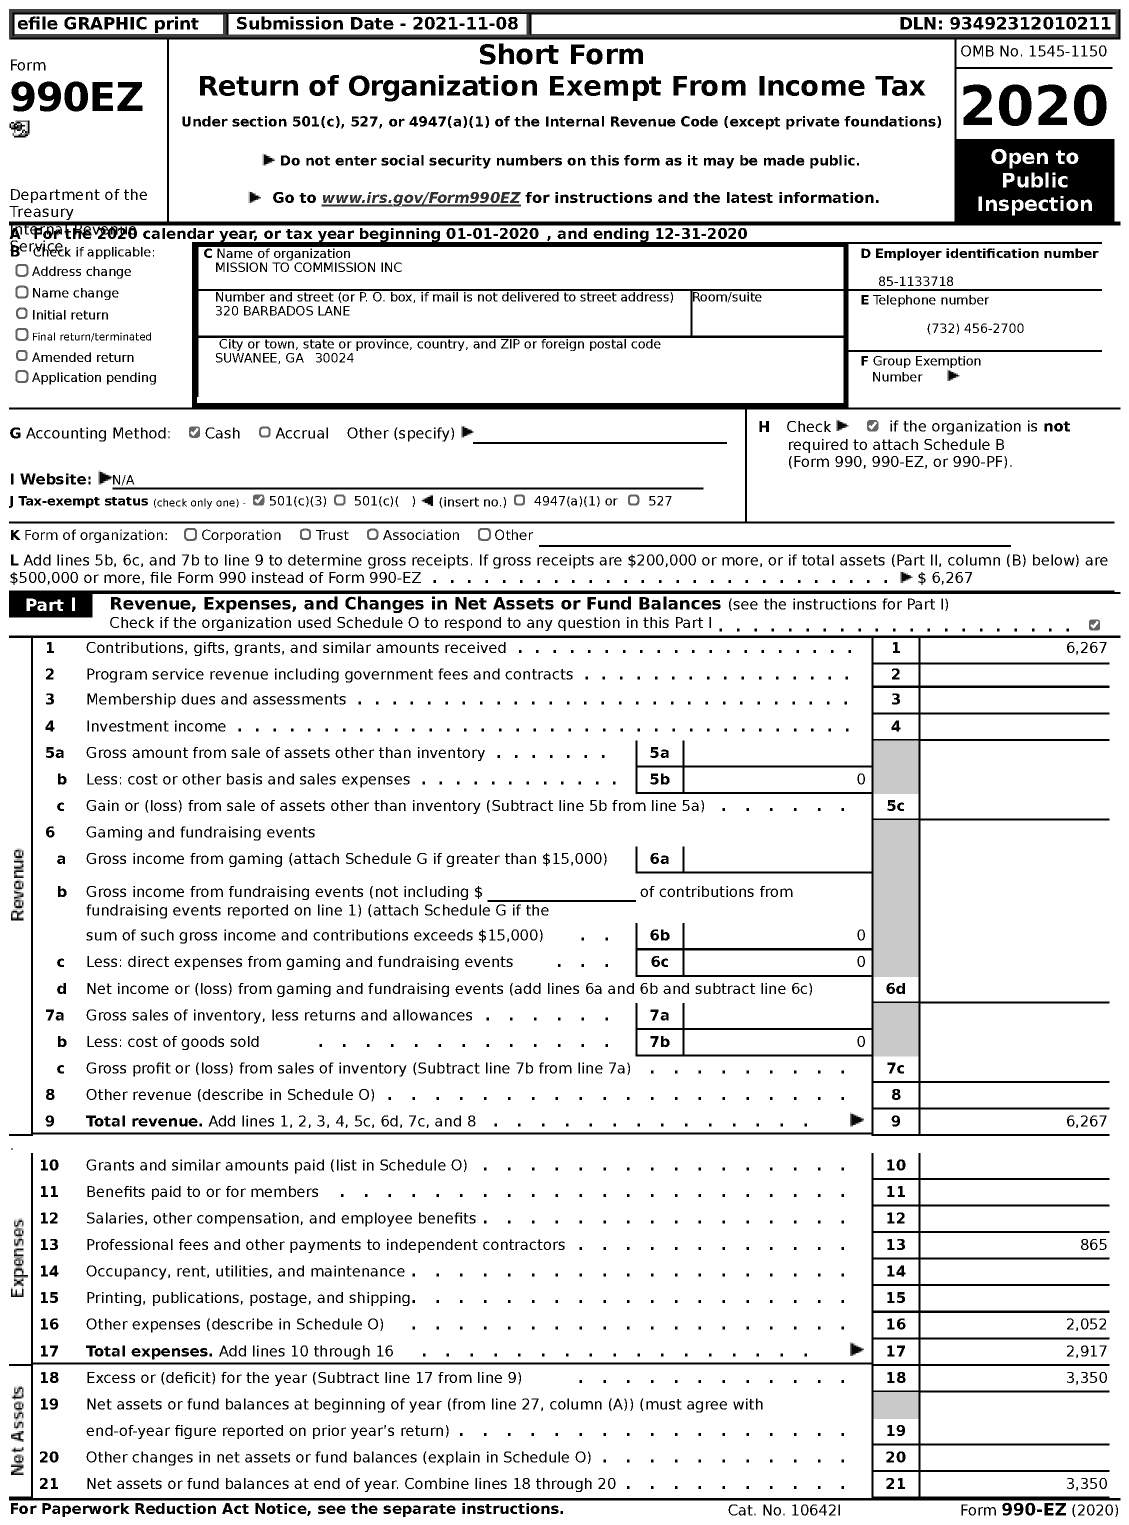 Image of first page of 2020 Form 990EZ for Mission to Commission Inc. (MTC)